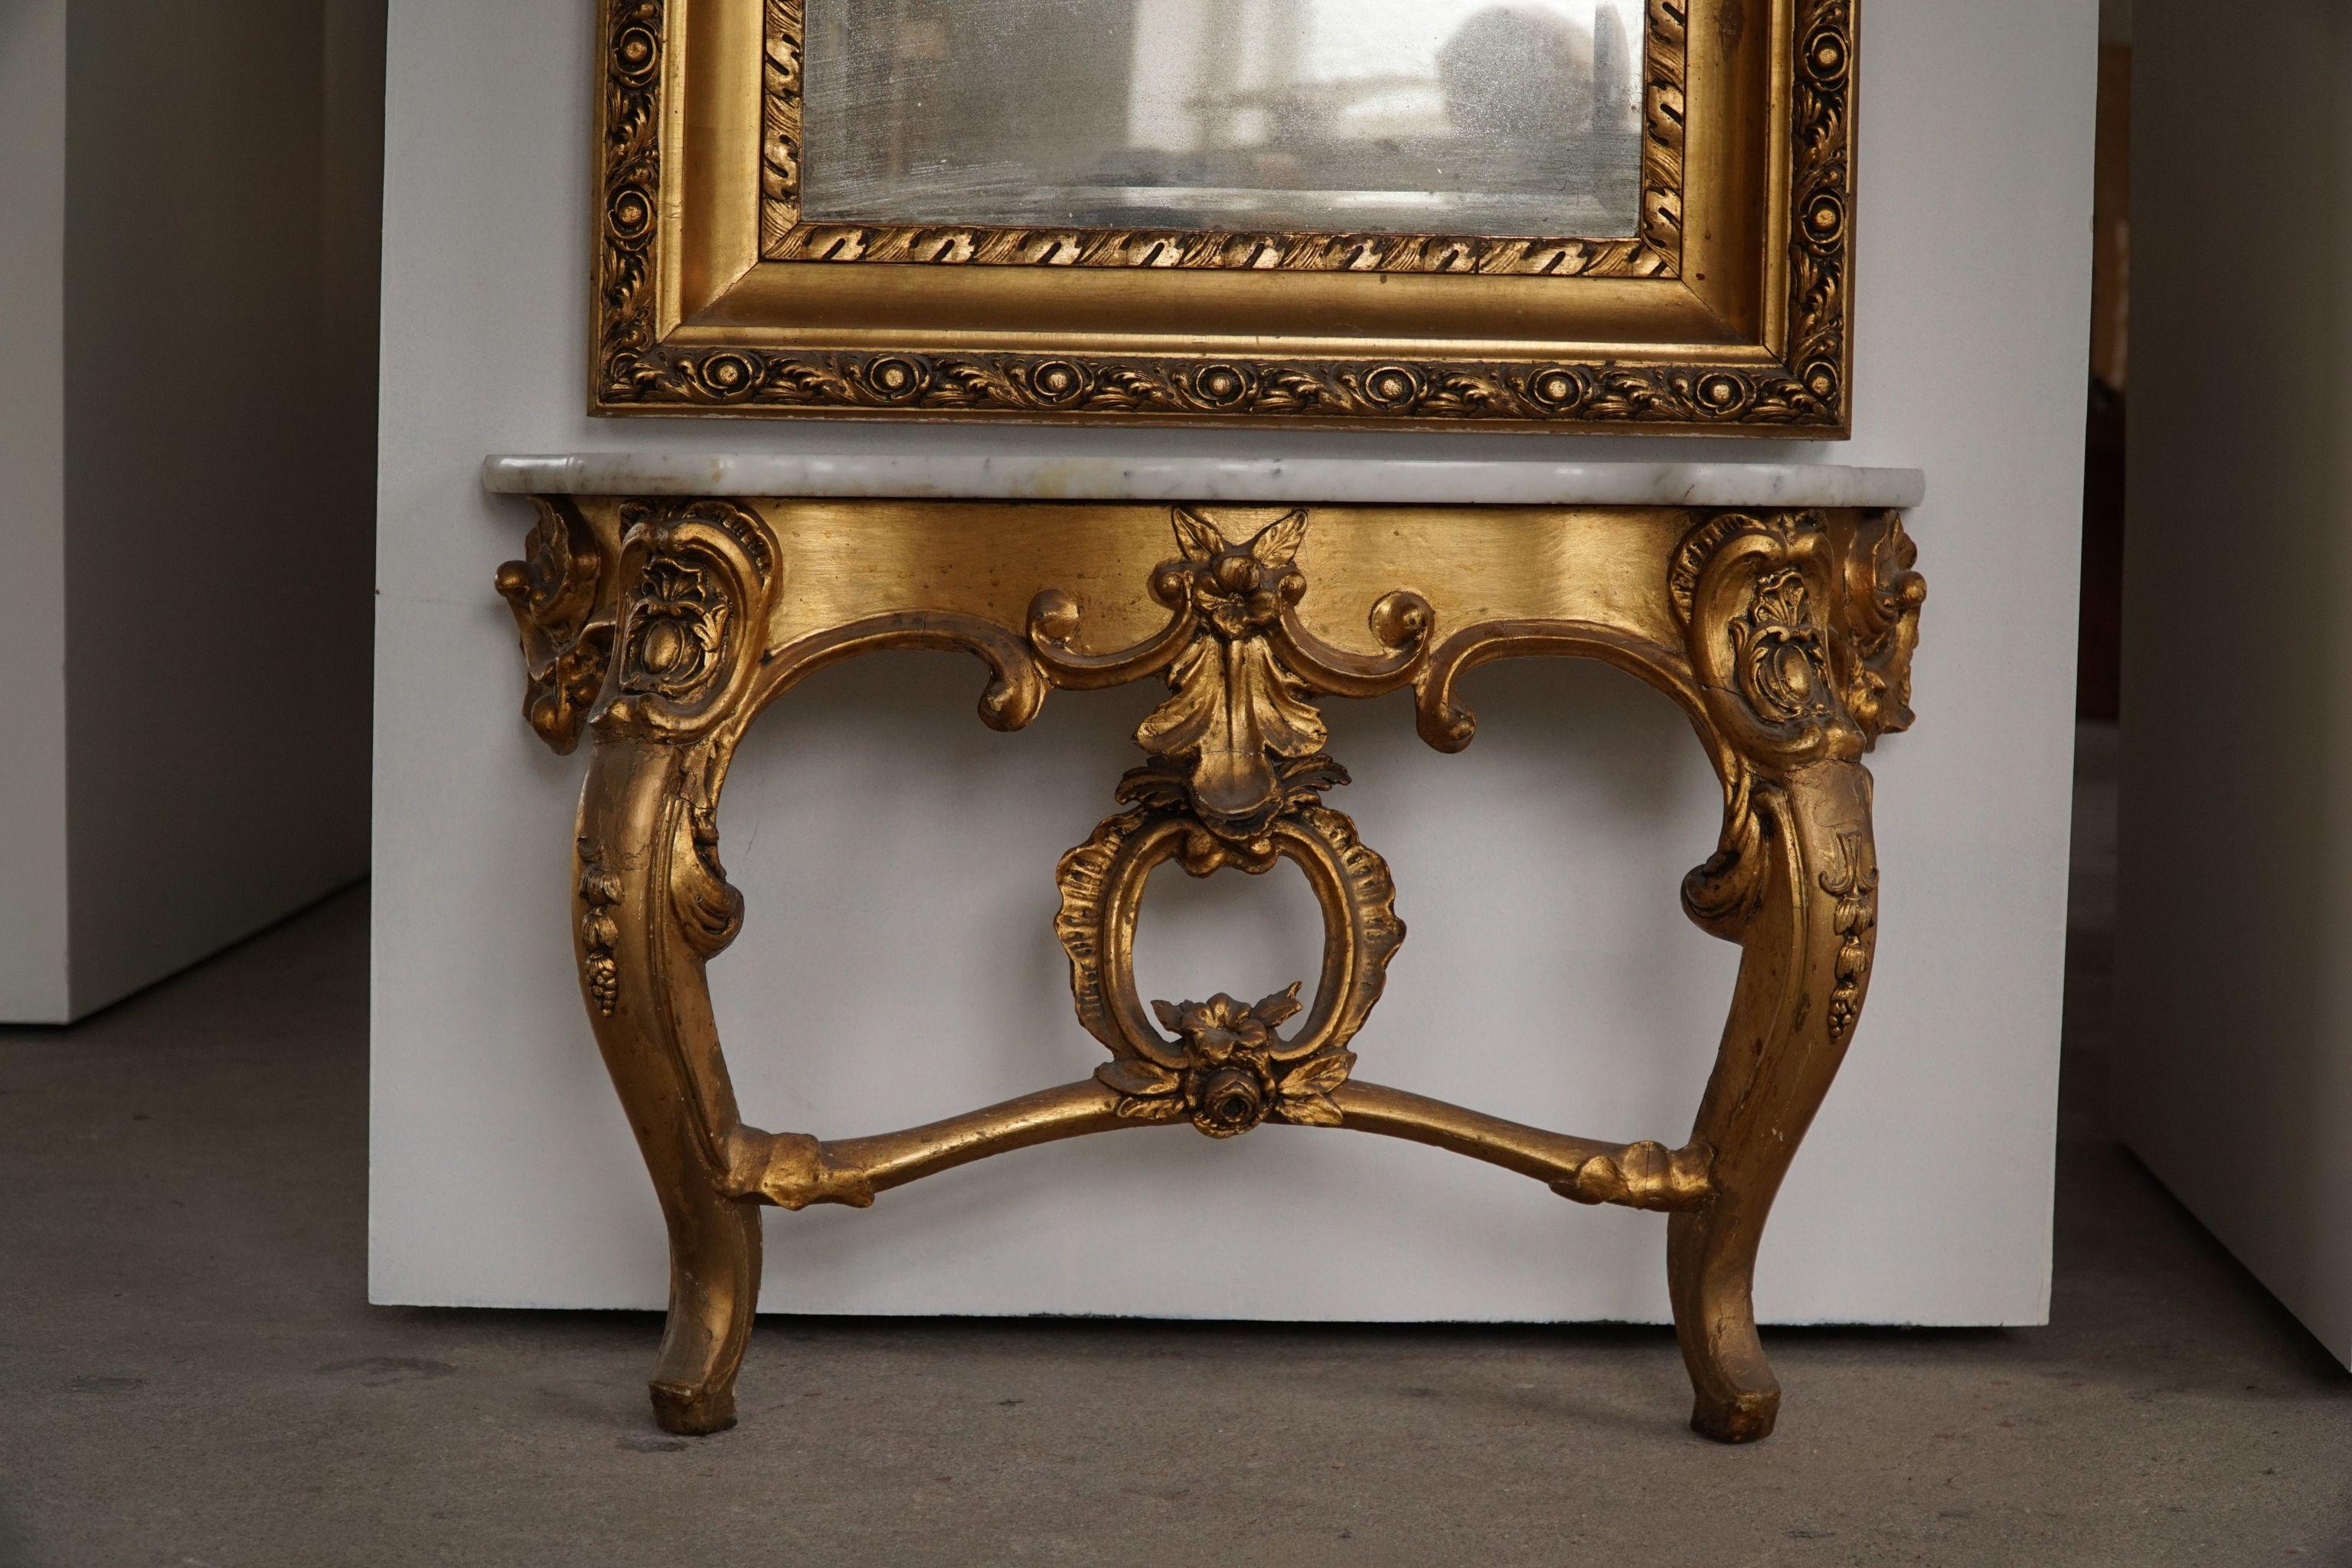 Antique Danish Mid-19th Century Rococo Gold Plated Mirror For Sale 8